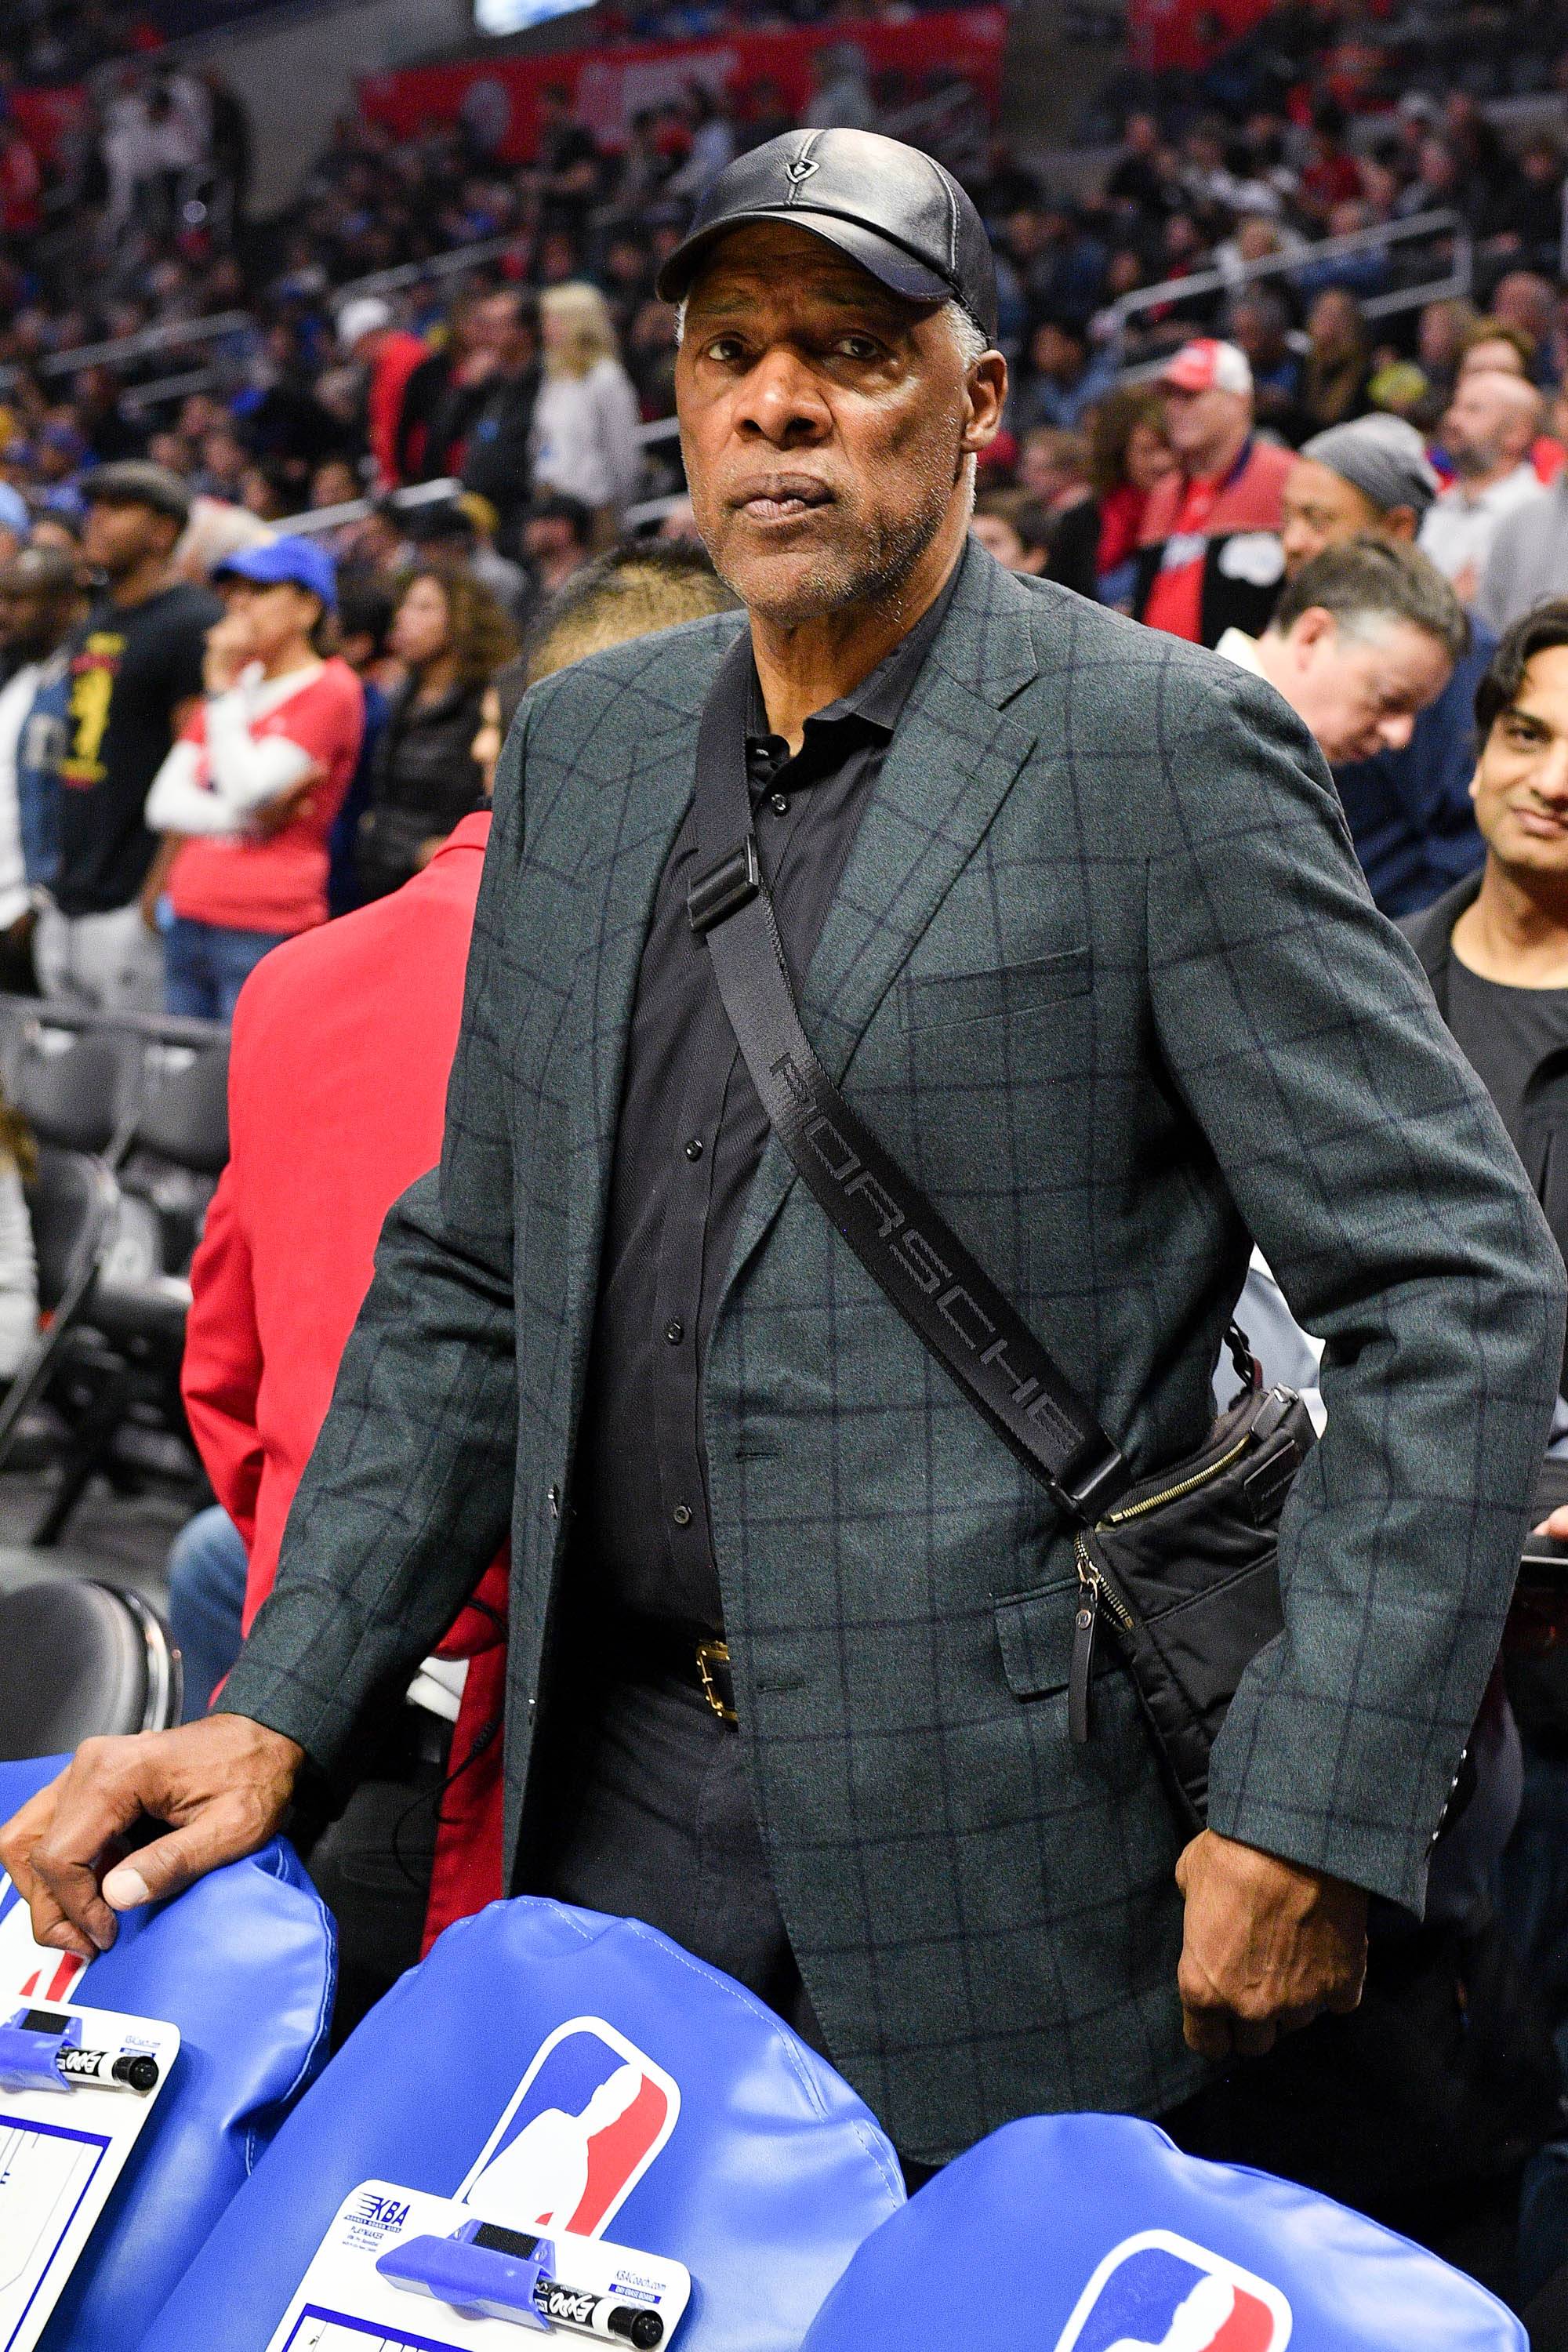 LOS ANGELES, CALIFORNIA - MARCH 01: Julius Erving attends a basketball game between the Los Angeles Clippers and the Philadelphia 76ers at Staples Center on March 01, 2020 in Los Angeles, California. (Photo by Allen Berezovsky/Getty Images)